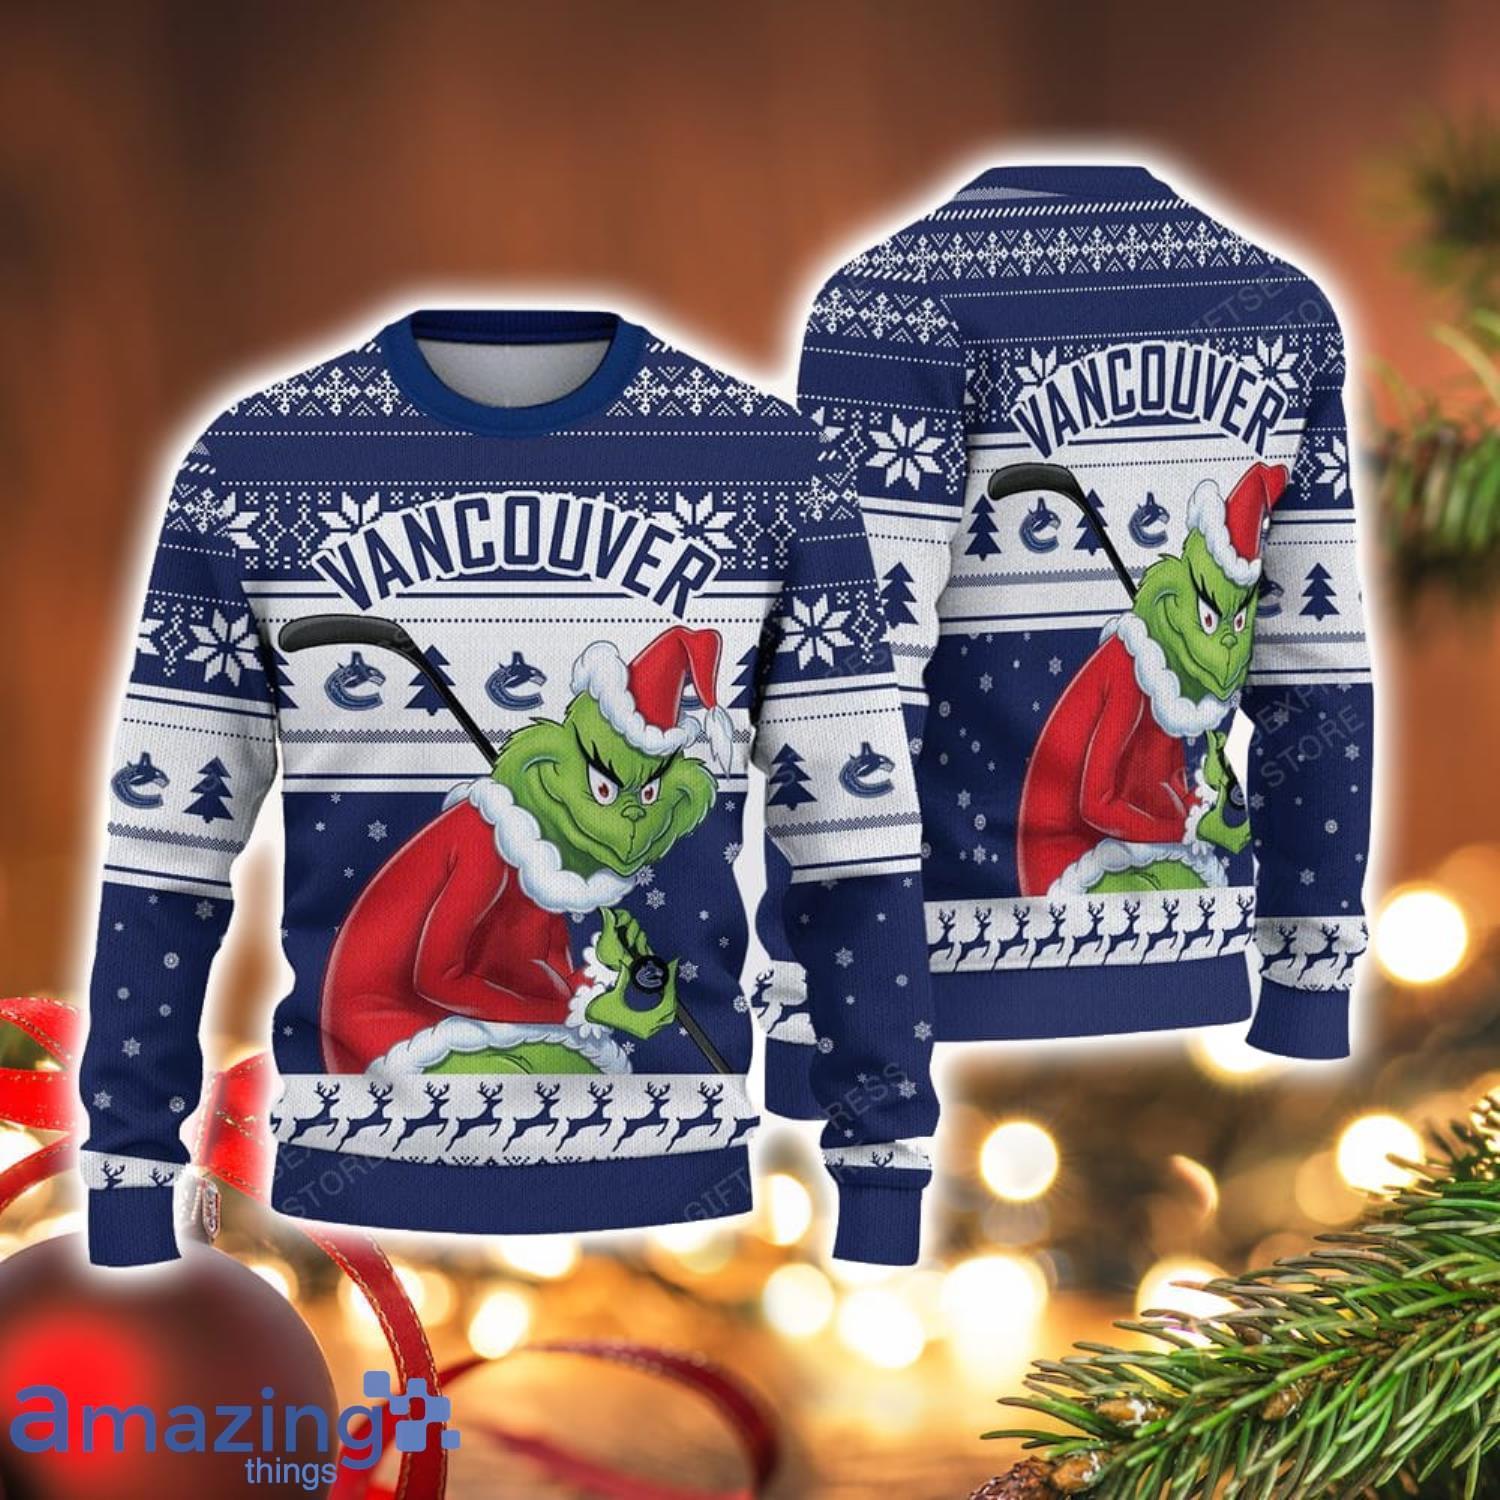 NCAA Vancouver Canucks Football Fans Sweater Grinch Ugly Sweater Christmas Christmas Gift Ideas Product Photo 1